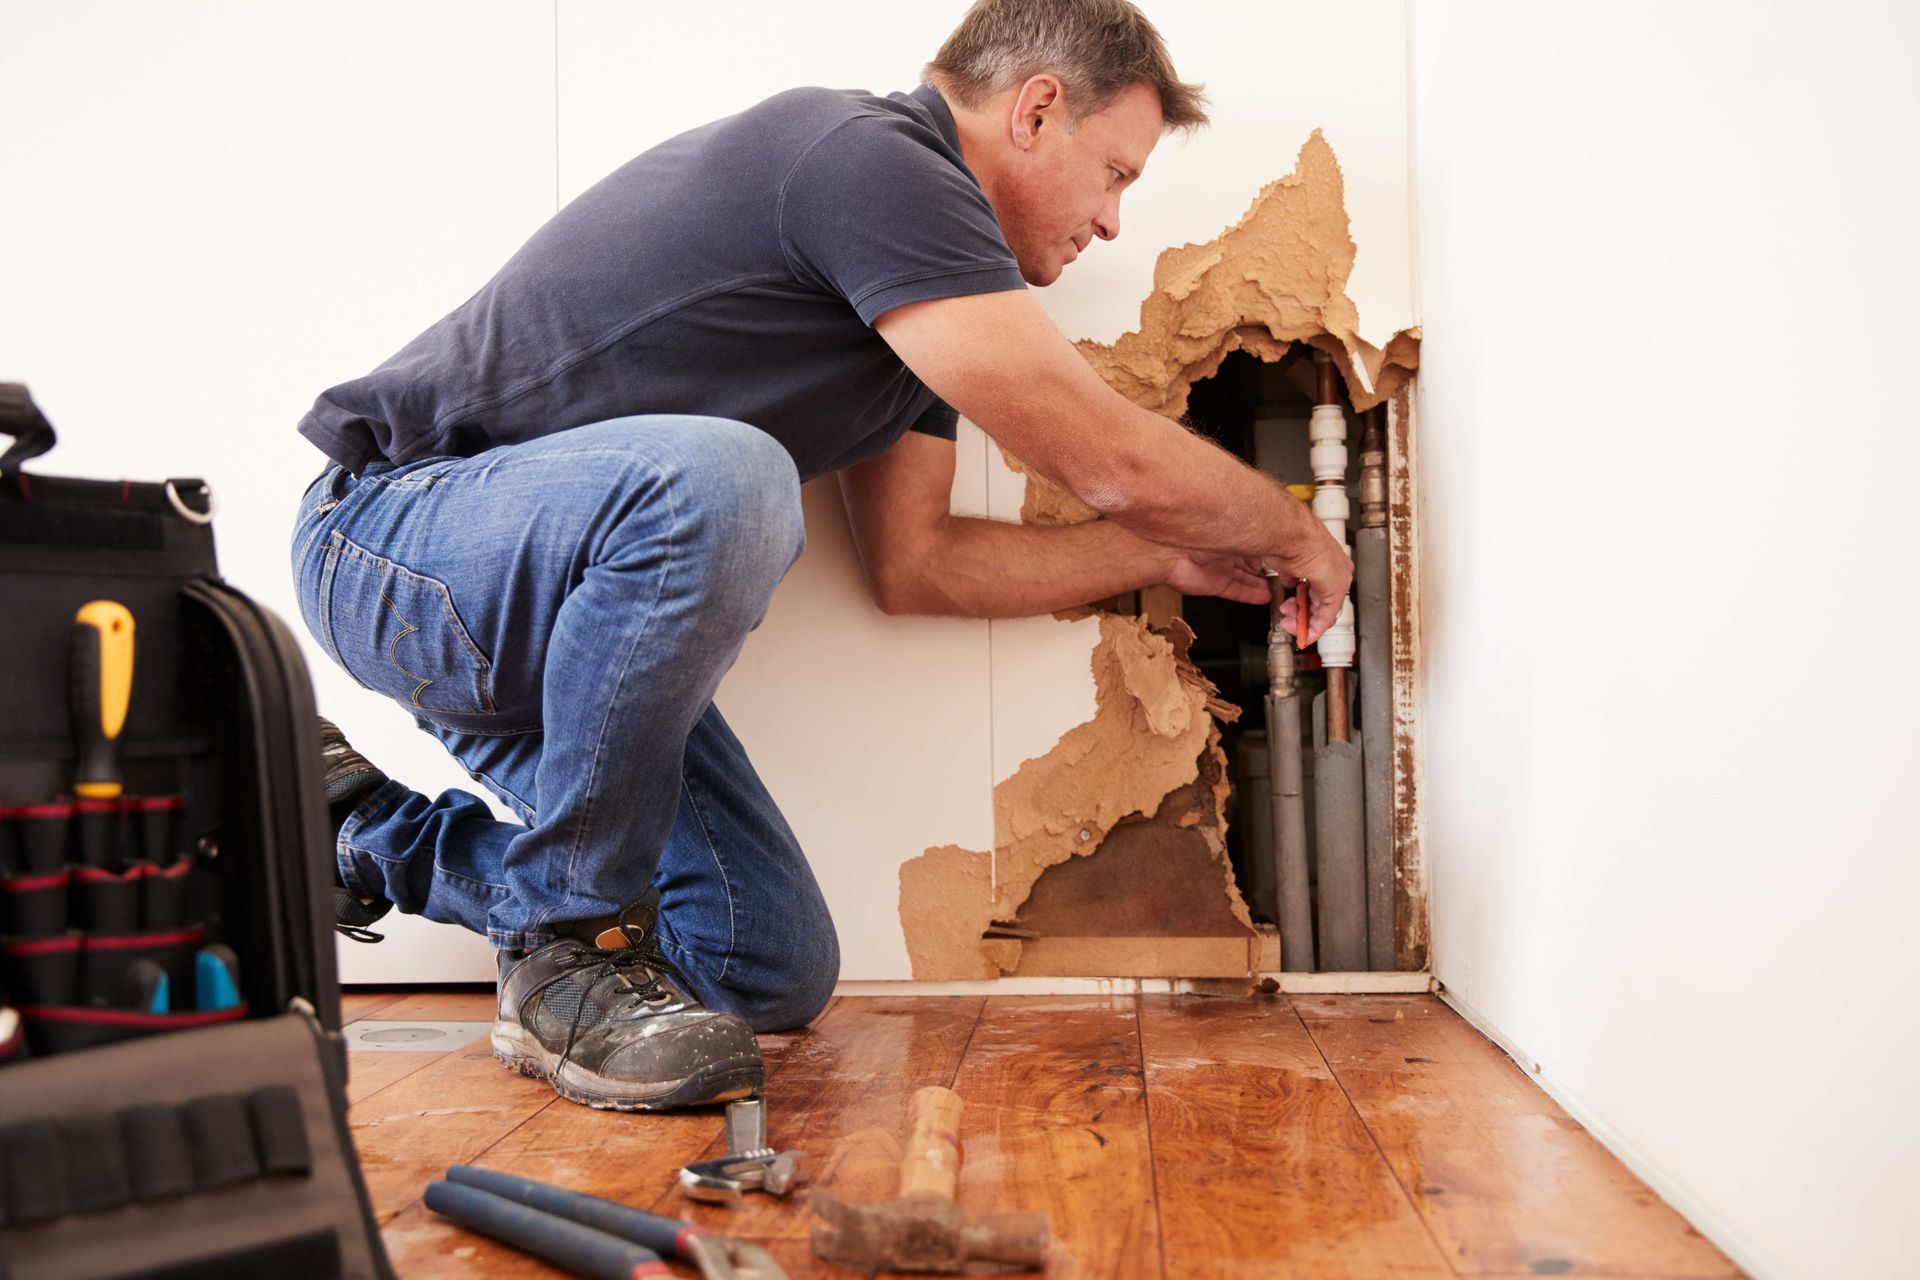 a man is kneeling down in a room fixing a pipe .